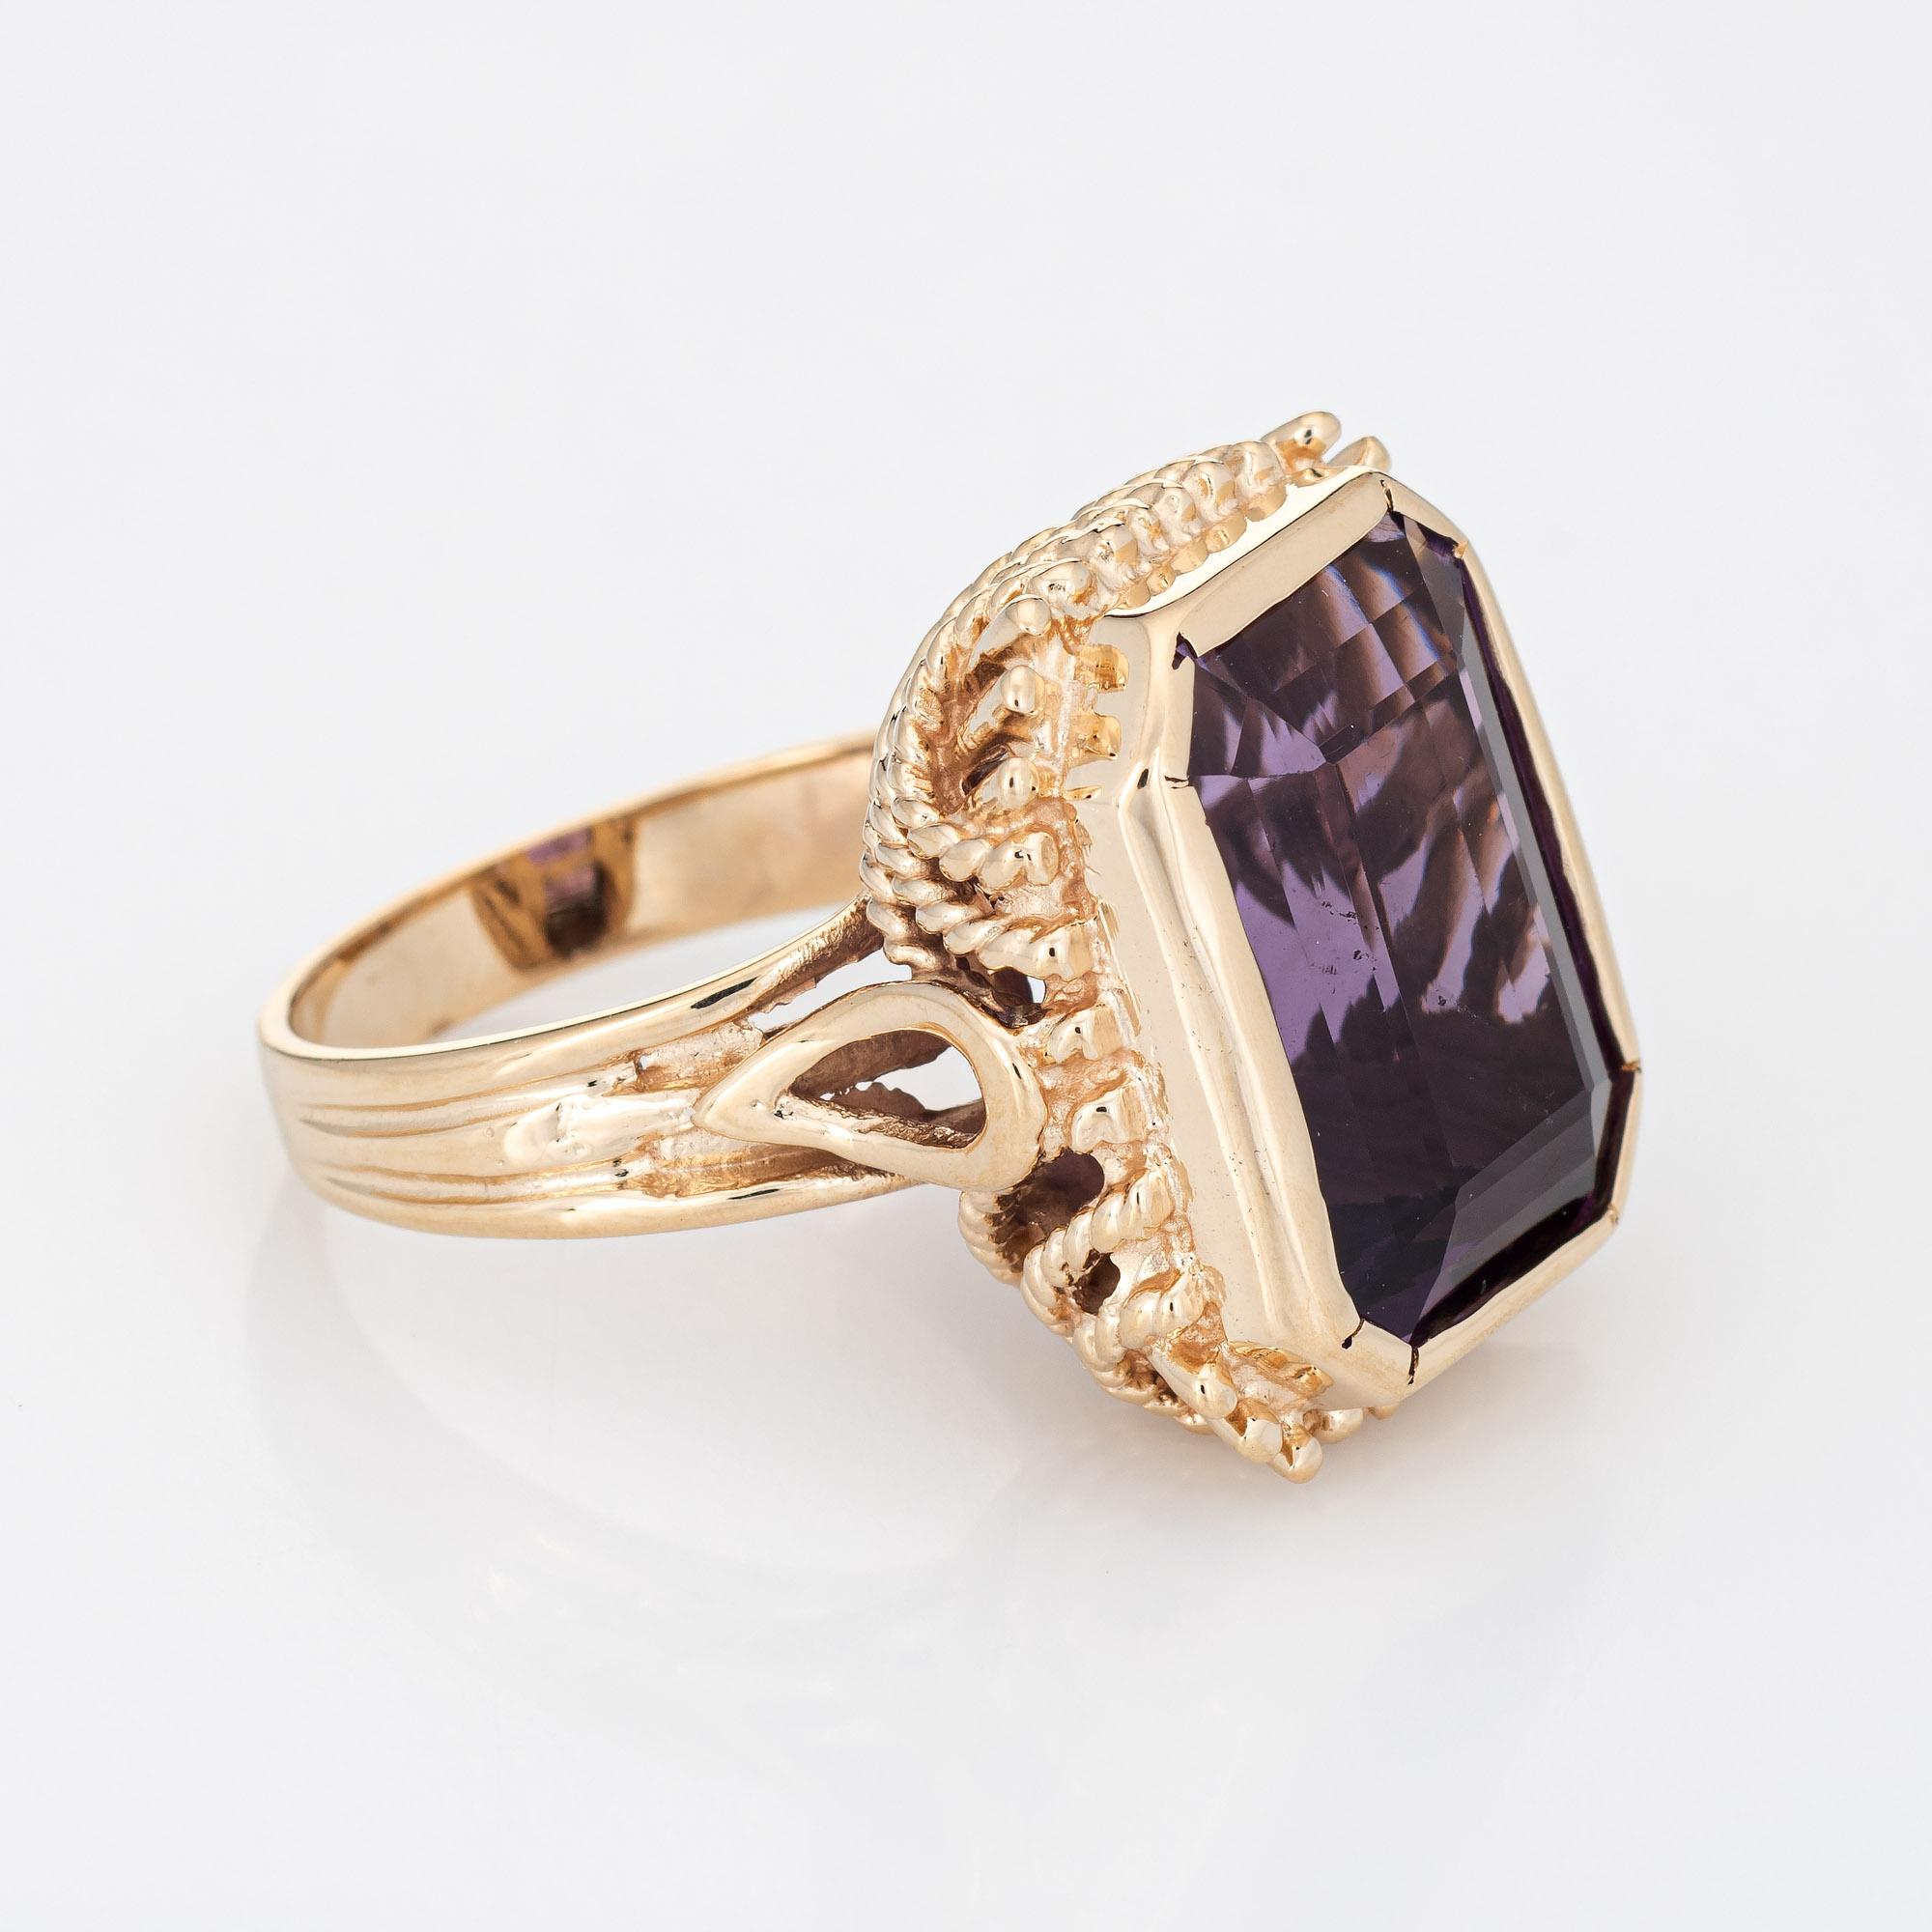 Modern 9ct Square Amethyst Ring Vintage 14k Yellow Gold Cocktail Estate Fine Jewelry 8